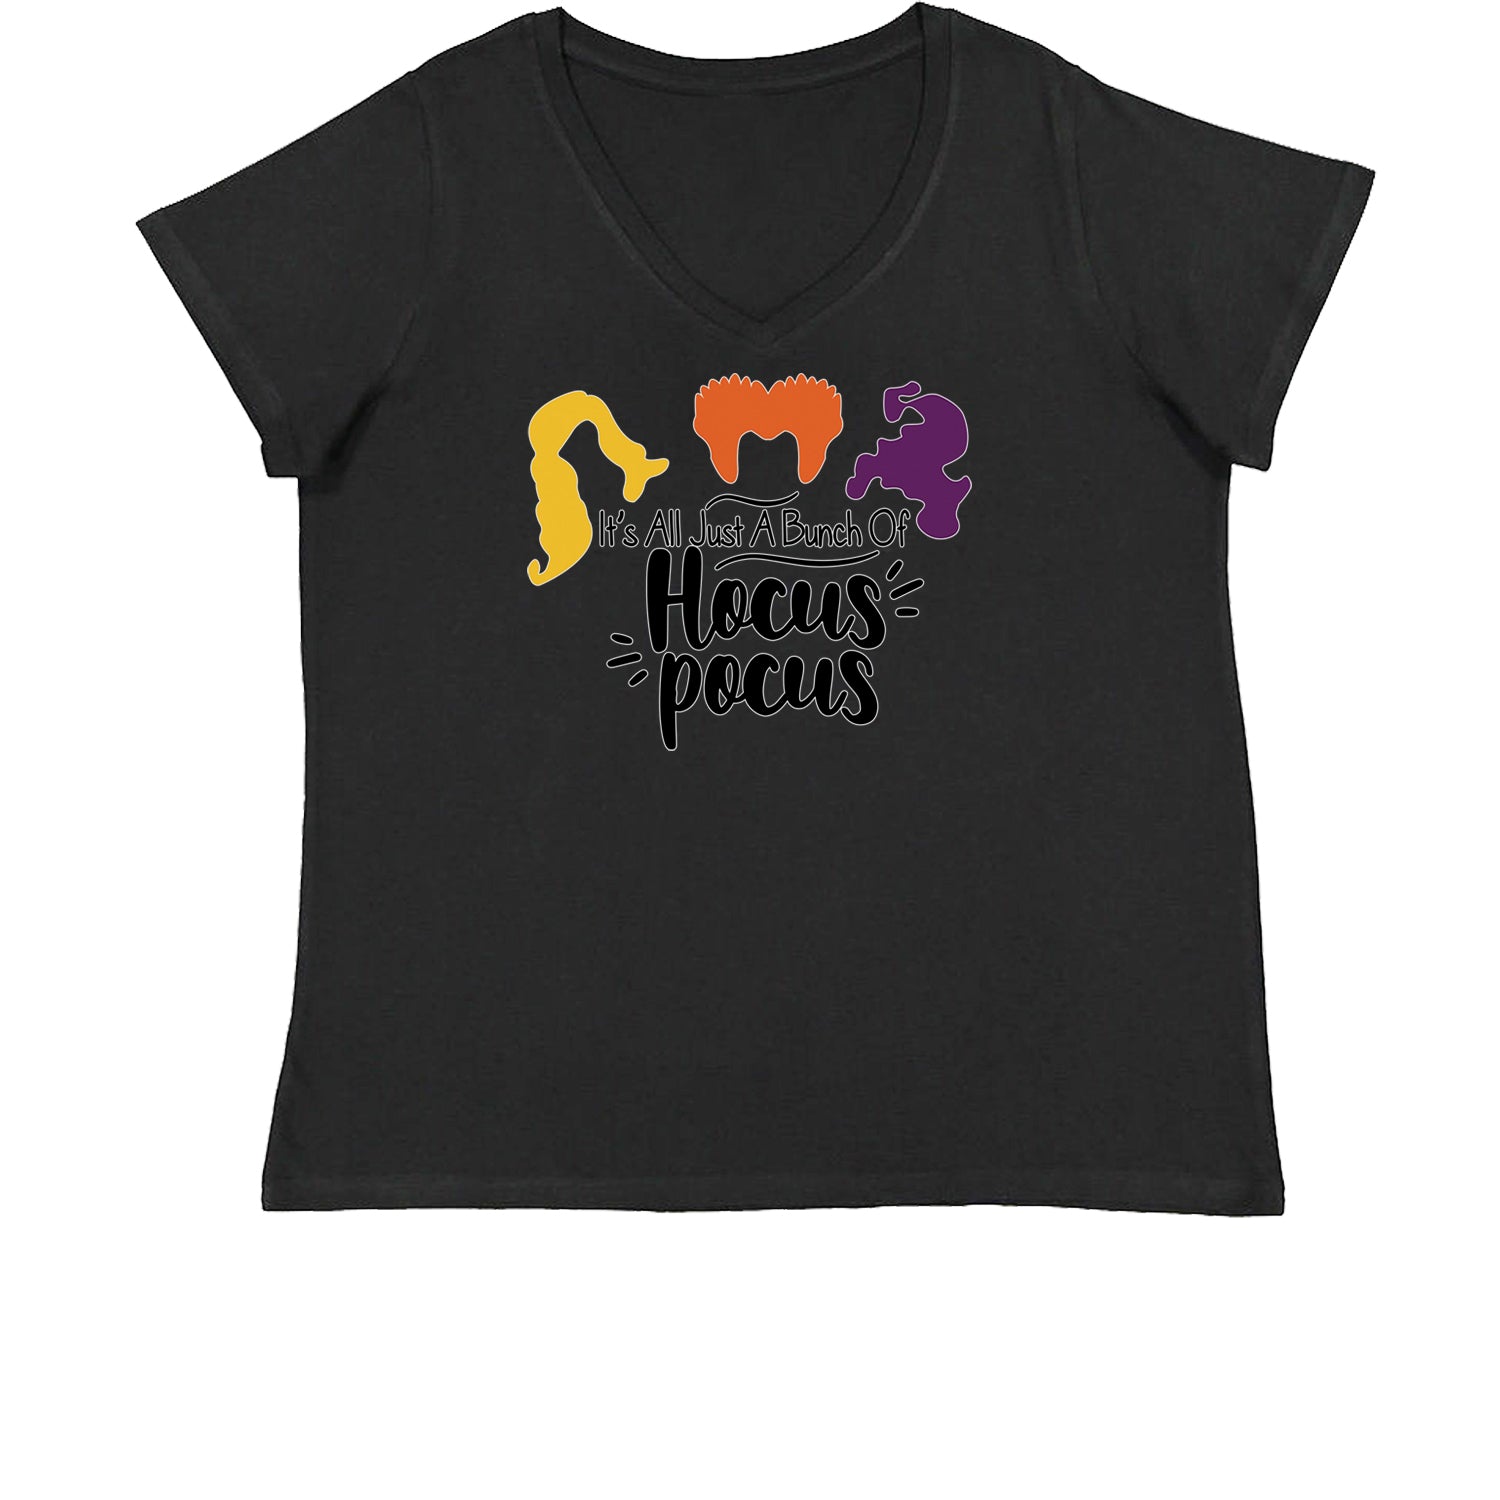 It's Just A Bunch Of Hocus Pocus Womens Plus Size V-Neck T-shirt descendants, enchanted, eve, hallows, hocus, or, pocus, sanderson, sisters, treat, trick, witches by Expression Tees